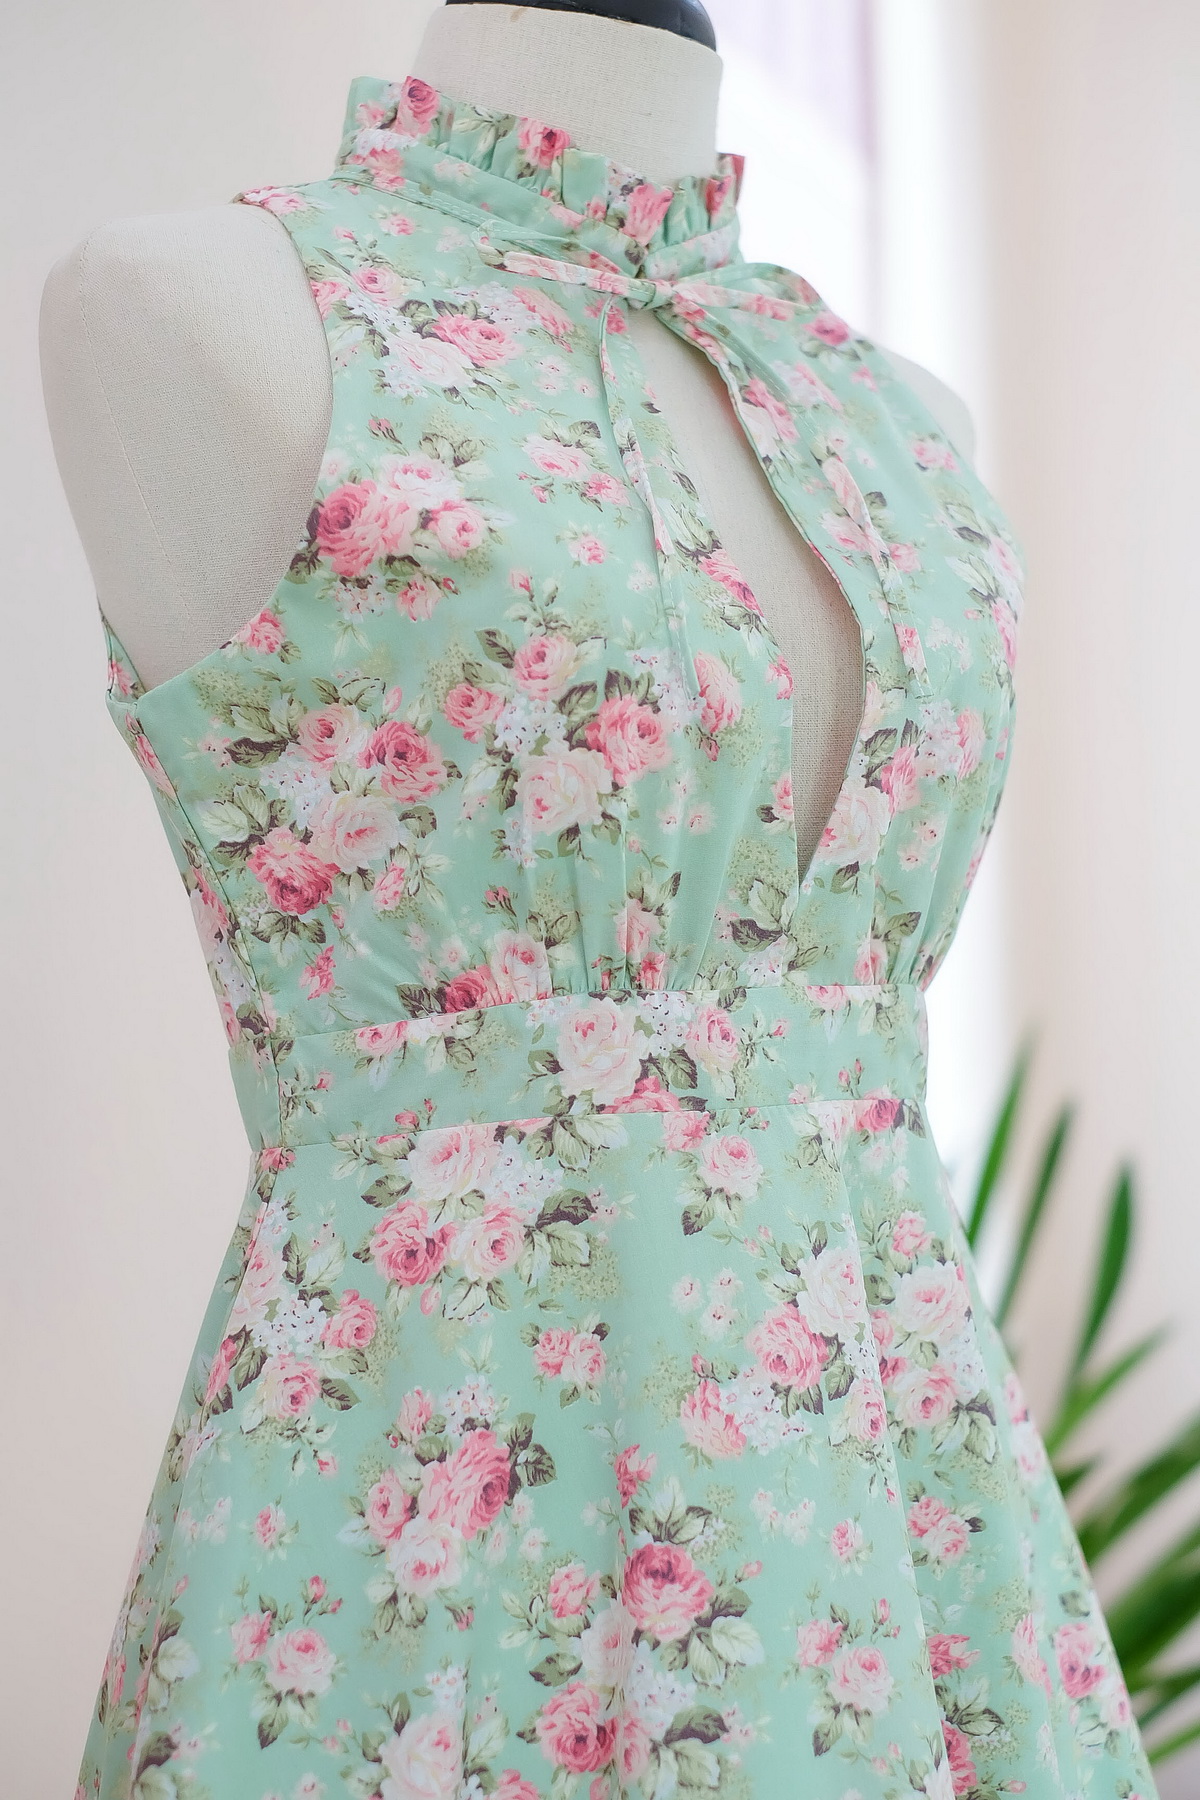 pink and green floral dress